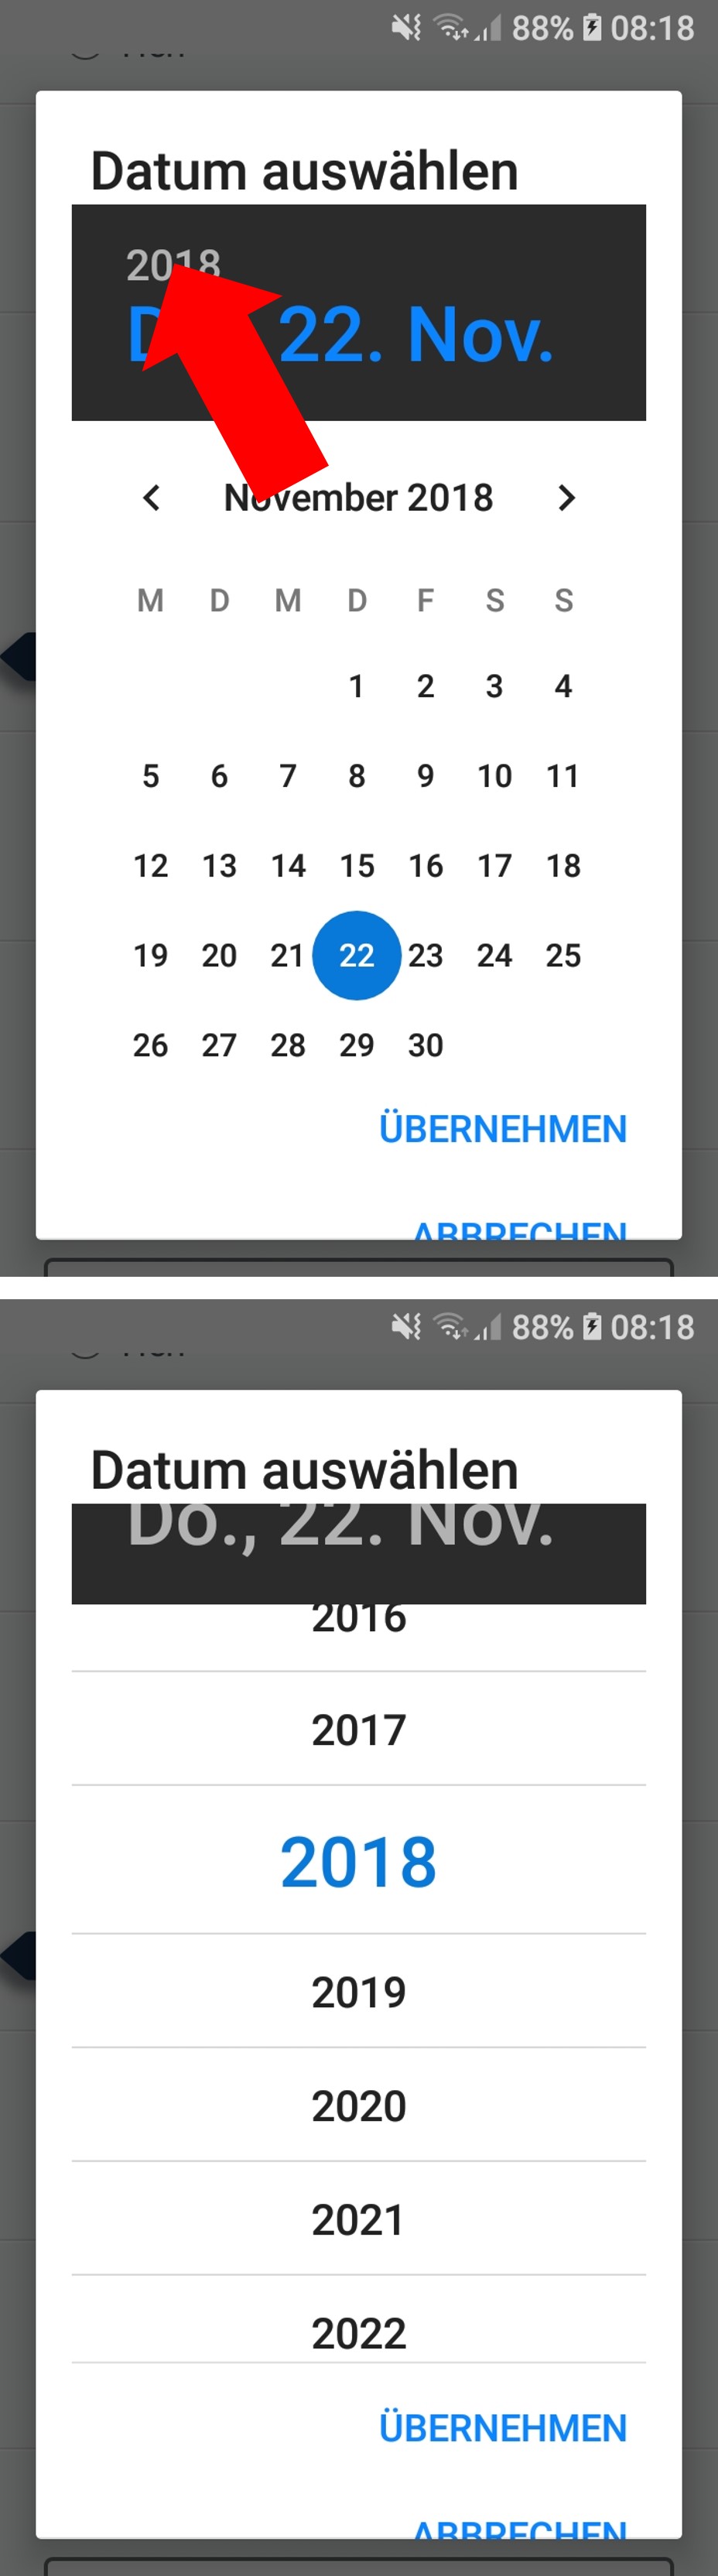 Infobild Datumswahl in Android